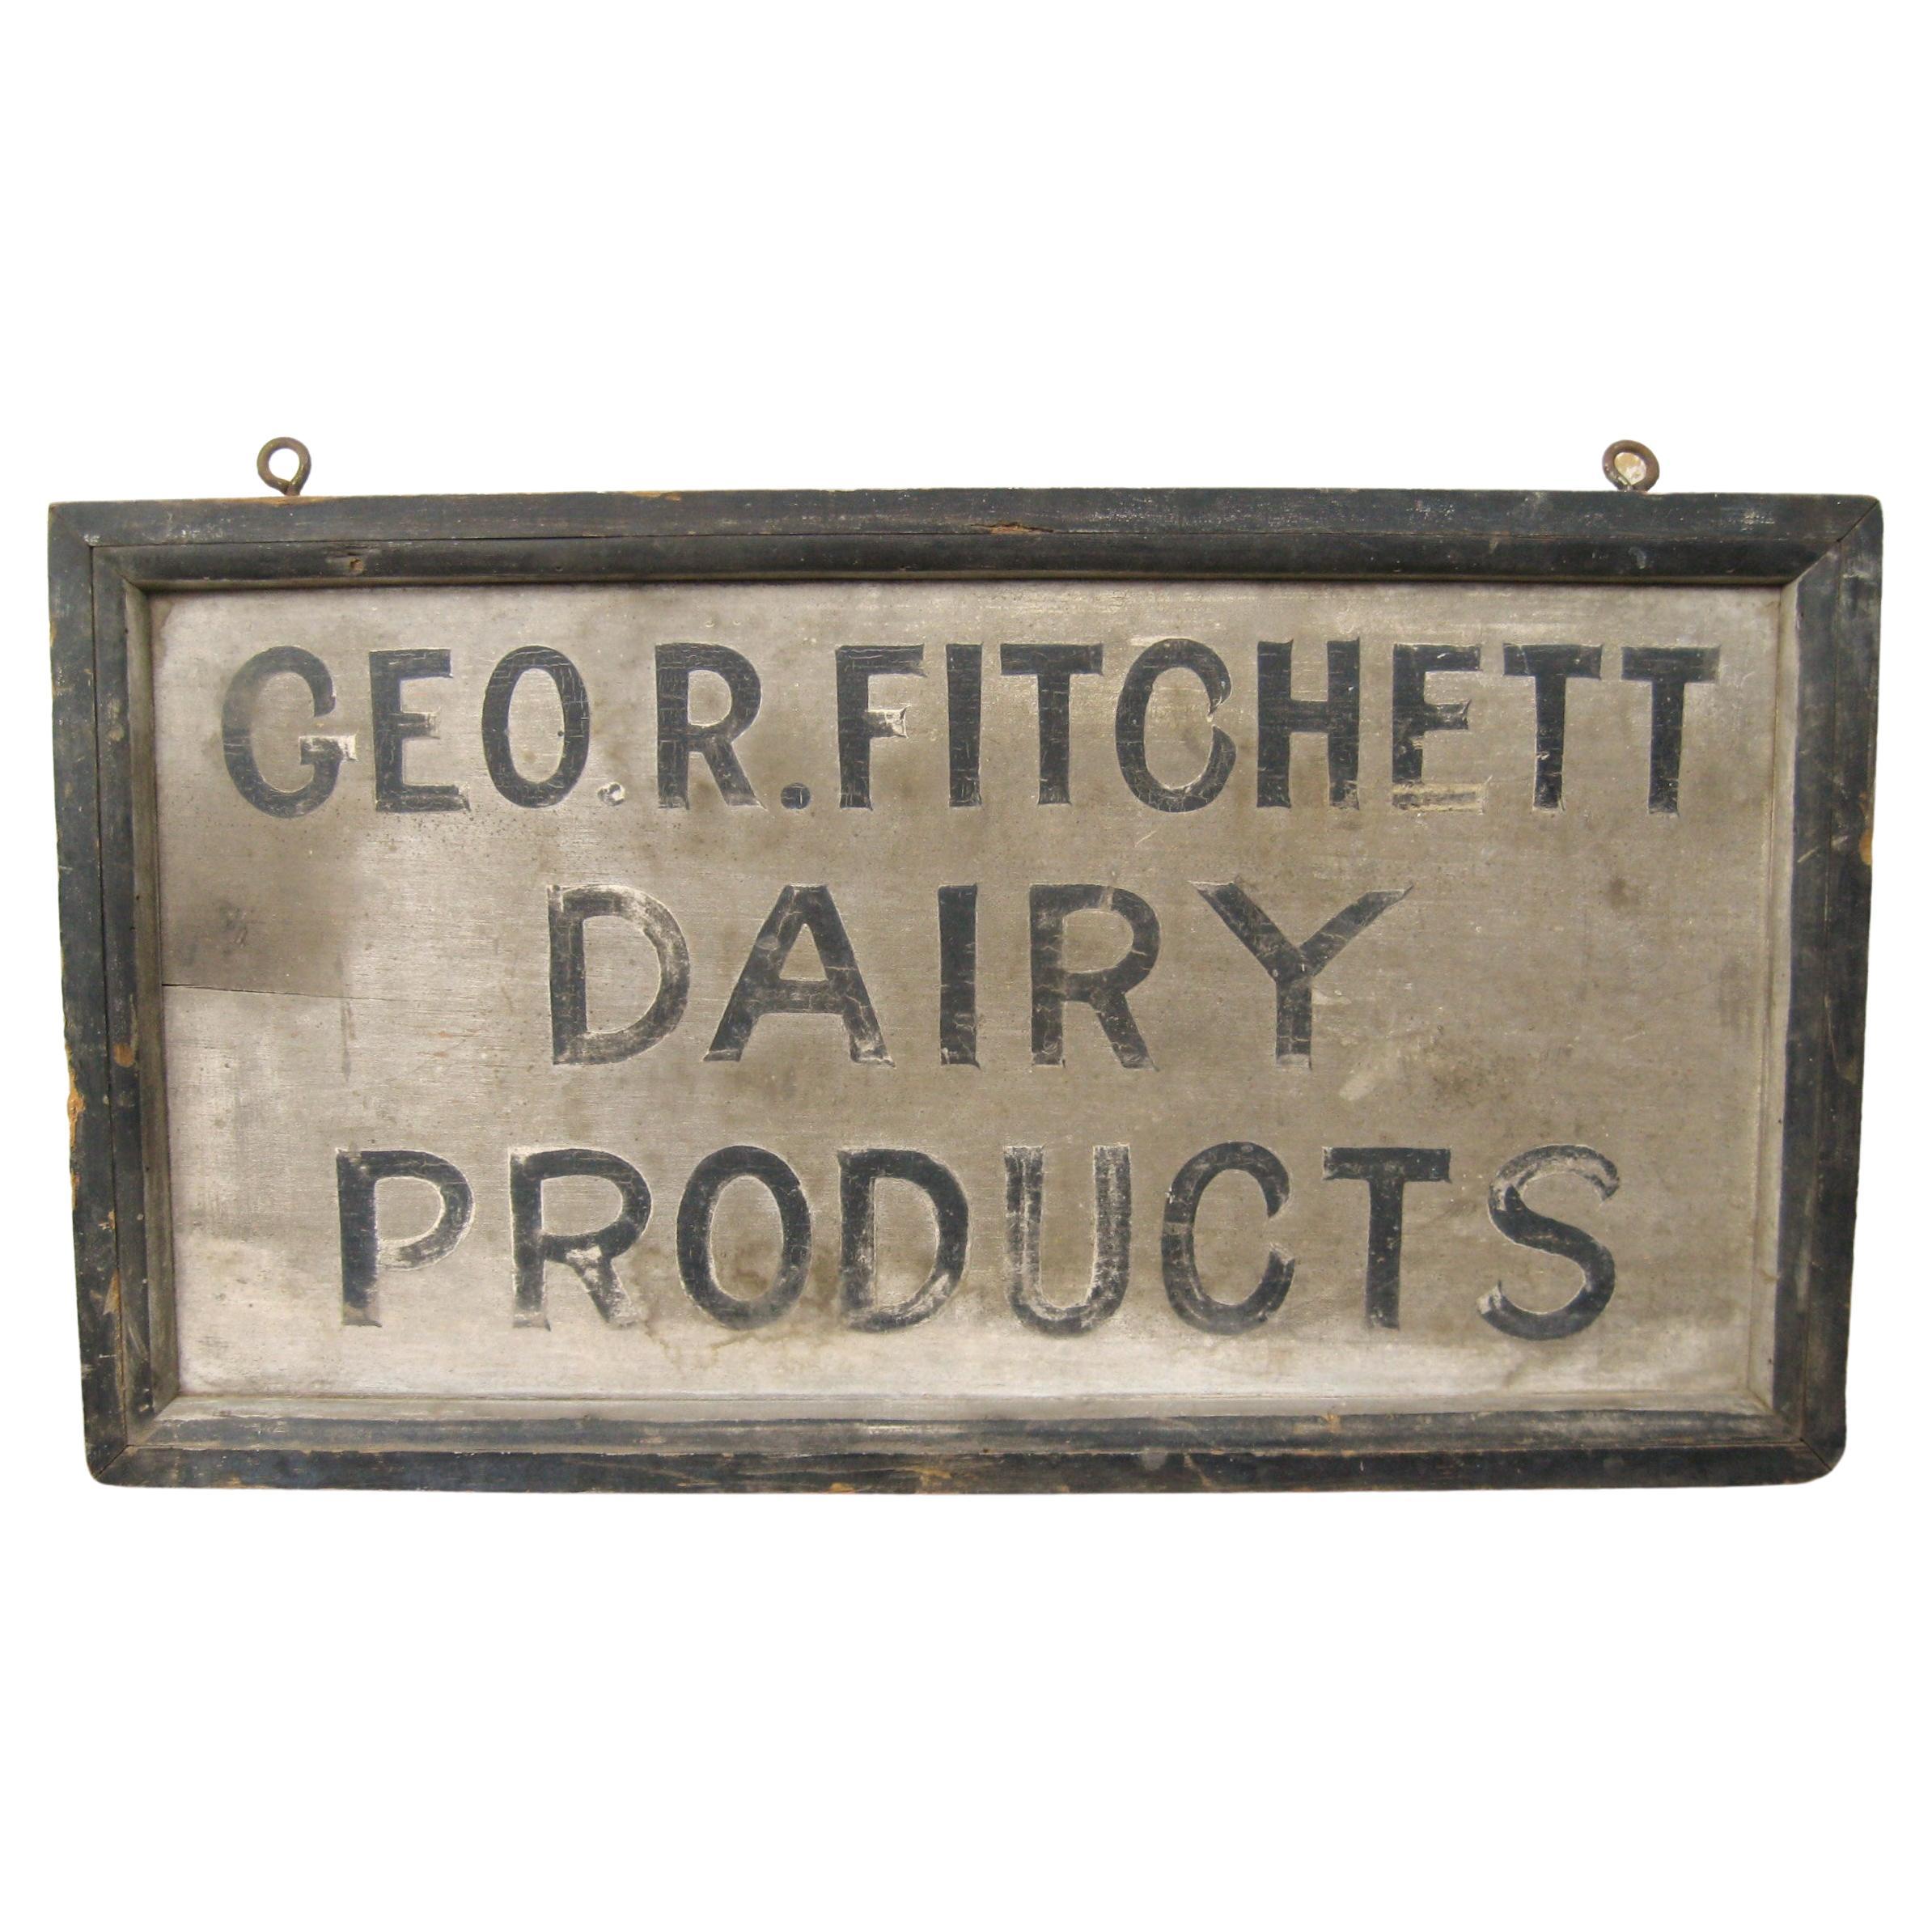  Dairy Products Trade Sign Geo Fitchett 1940s